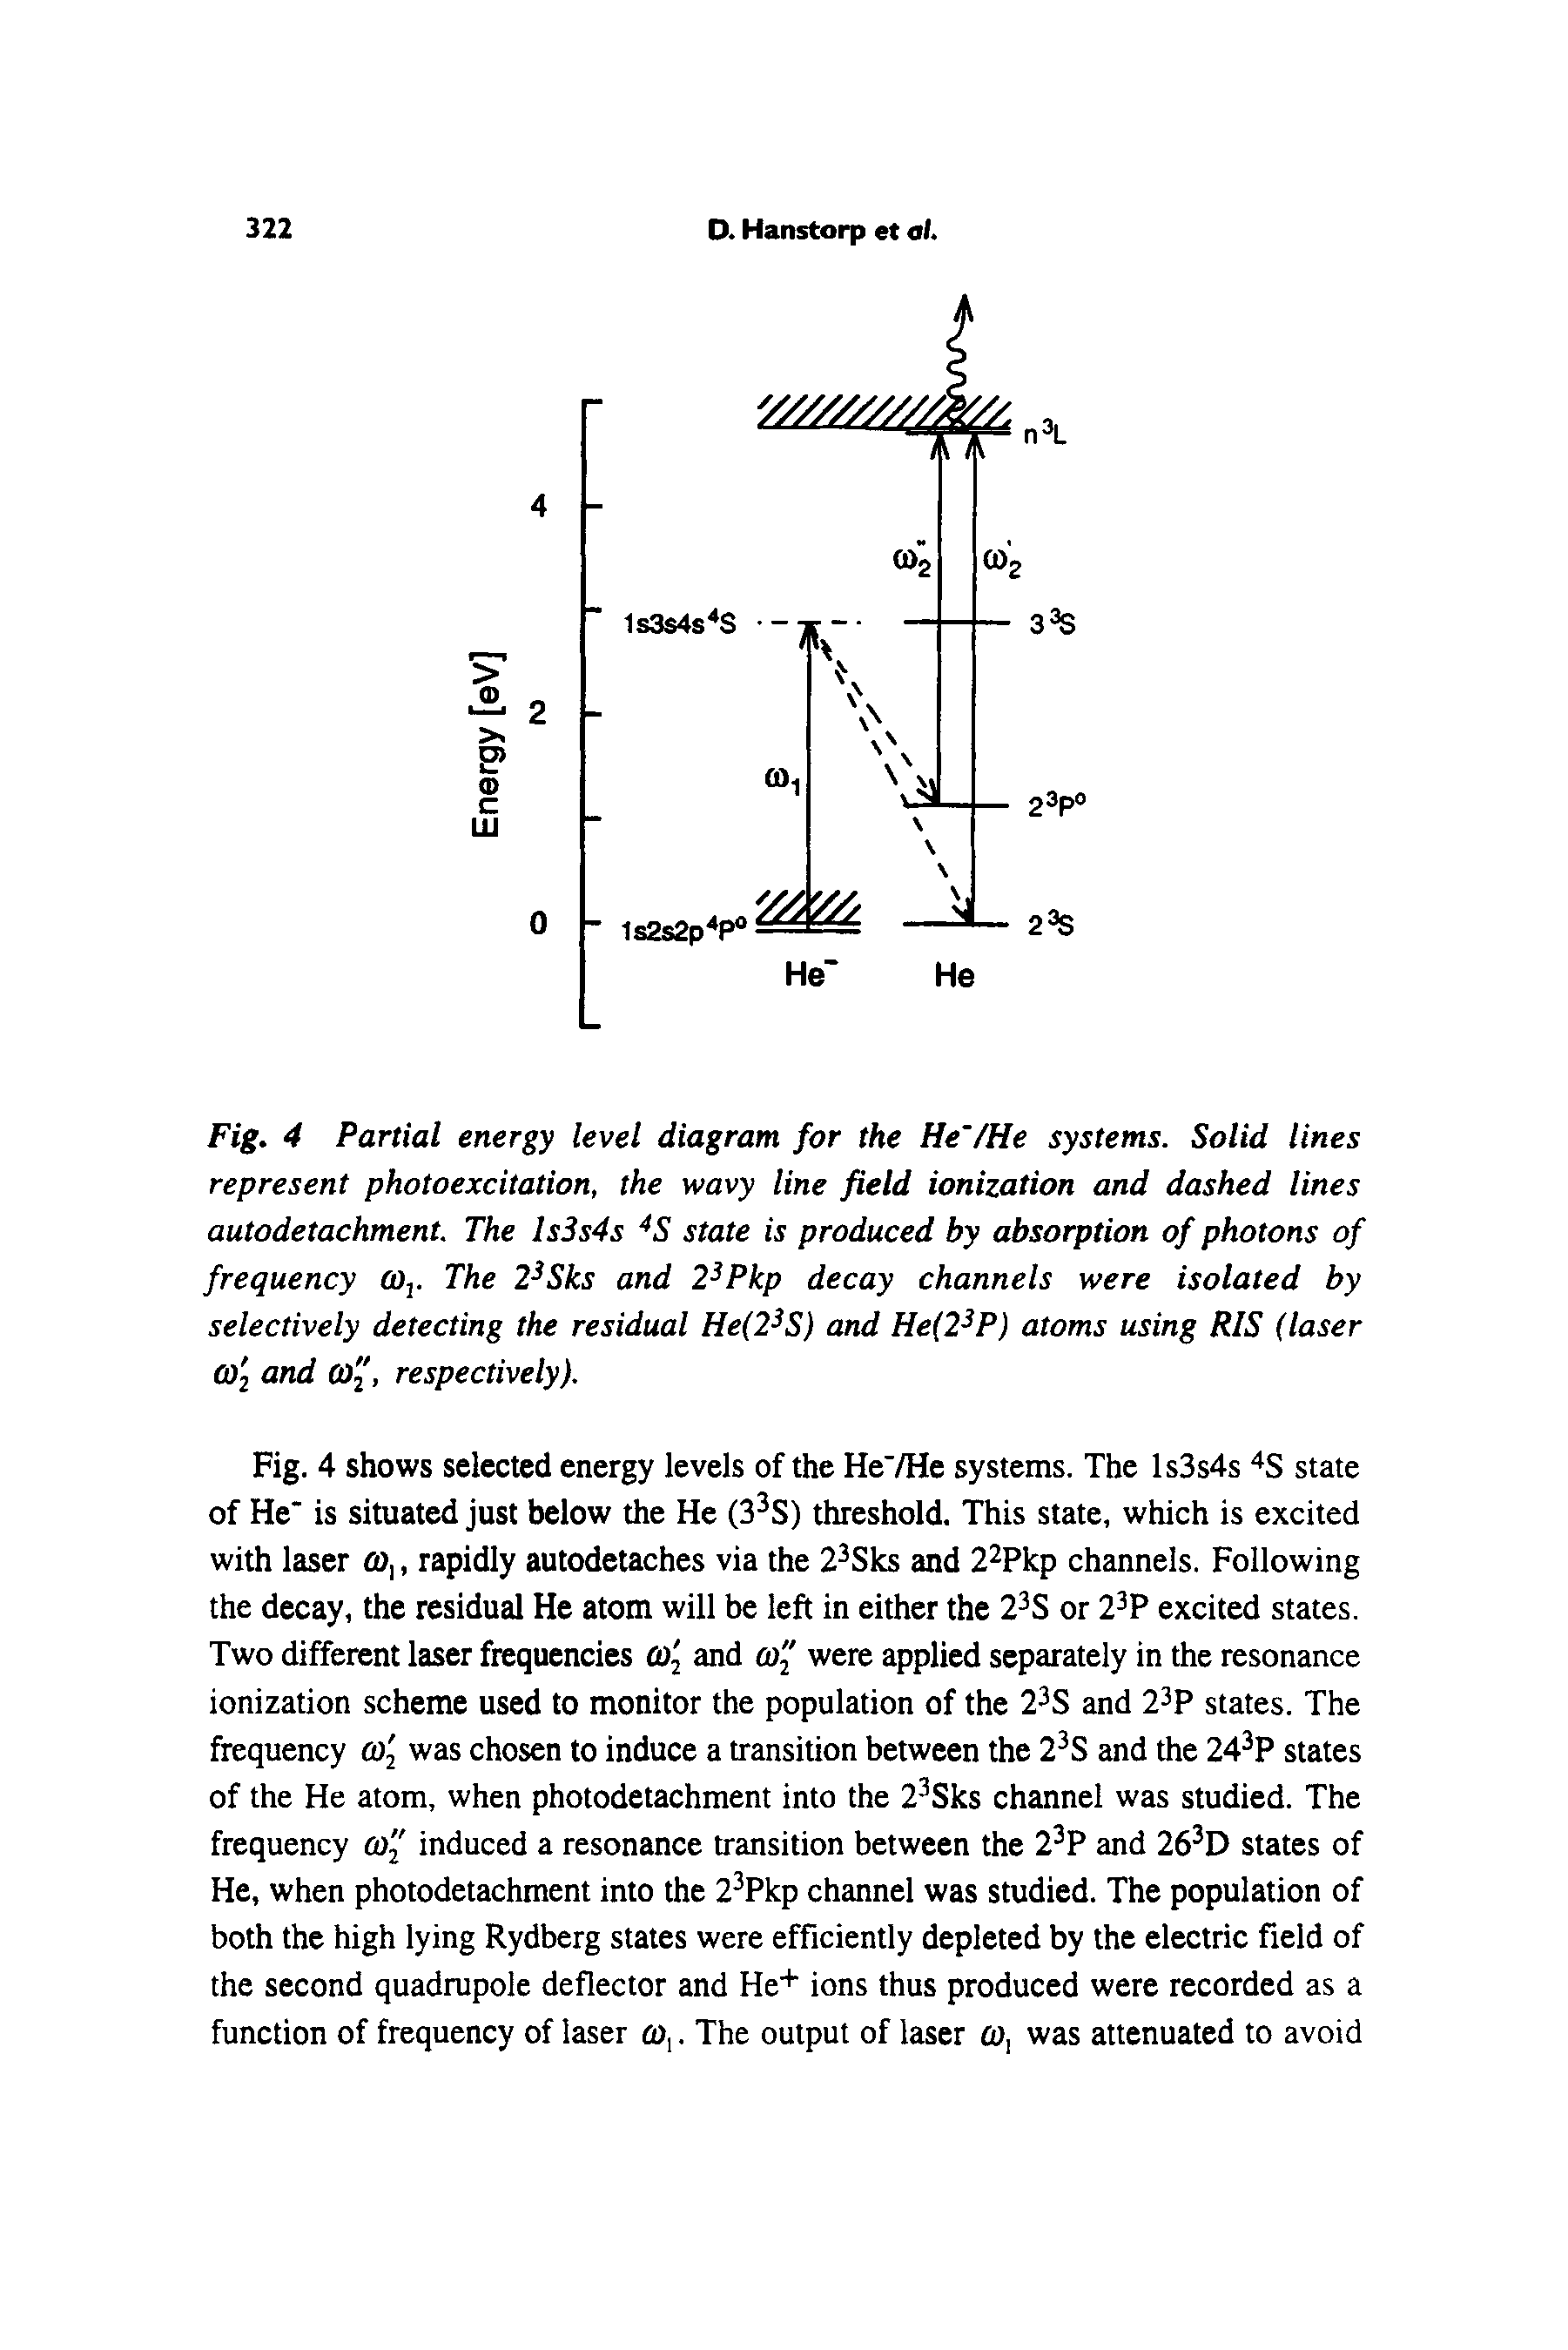 Fig. 4 Partial energy level diagram for the He /He systems. Solid lines represent photoexcitation, the wavy line field ionization and dashed lines autodetachment. The Is3s4s state is produced by absorption of photons of frequency eOj. The 2 Sks and 2 Pkp decay channels were isolated by selectively detecting the residual He(2 S) and He(2 P) atoms using RIS (laser CO2 and co", respectively).